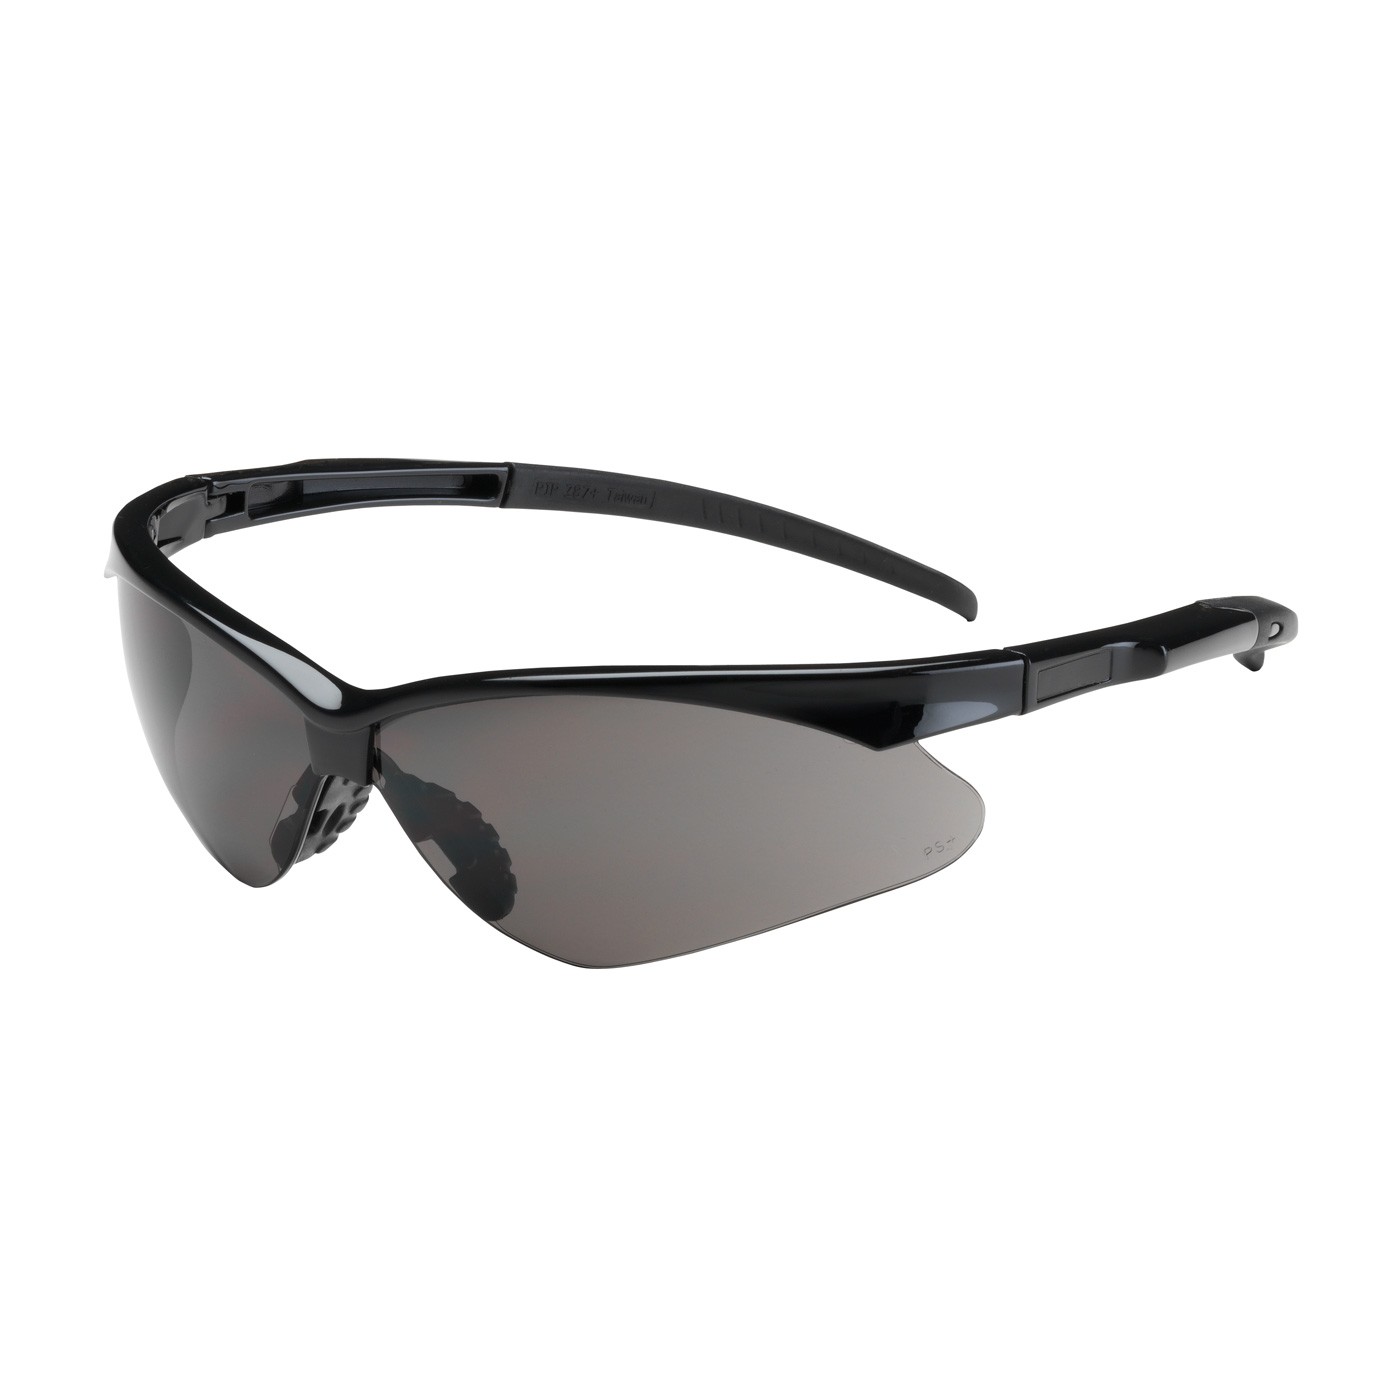 Adversary™ Semi-Rimless Safety Glasses with Black Frame, Gray Lens and Anti-Scratch Coating  (#250-28-0001)